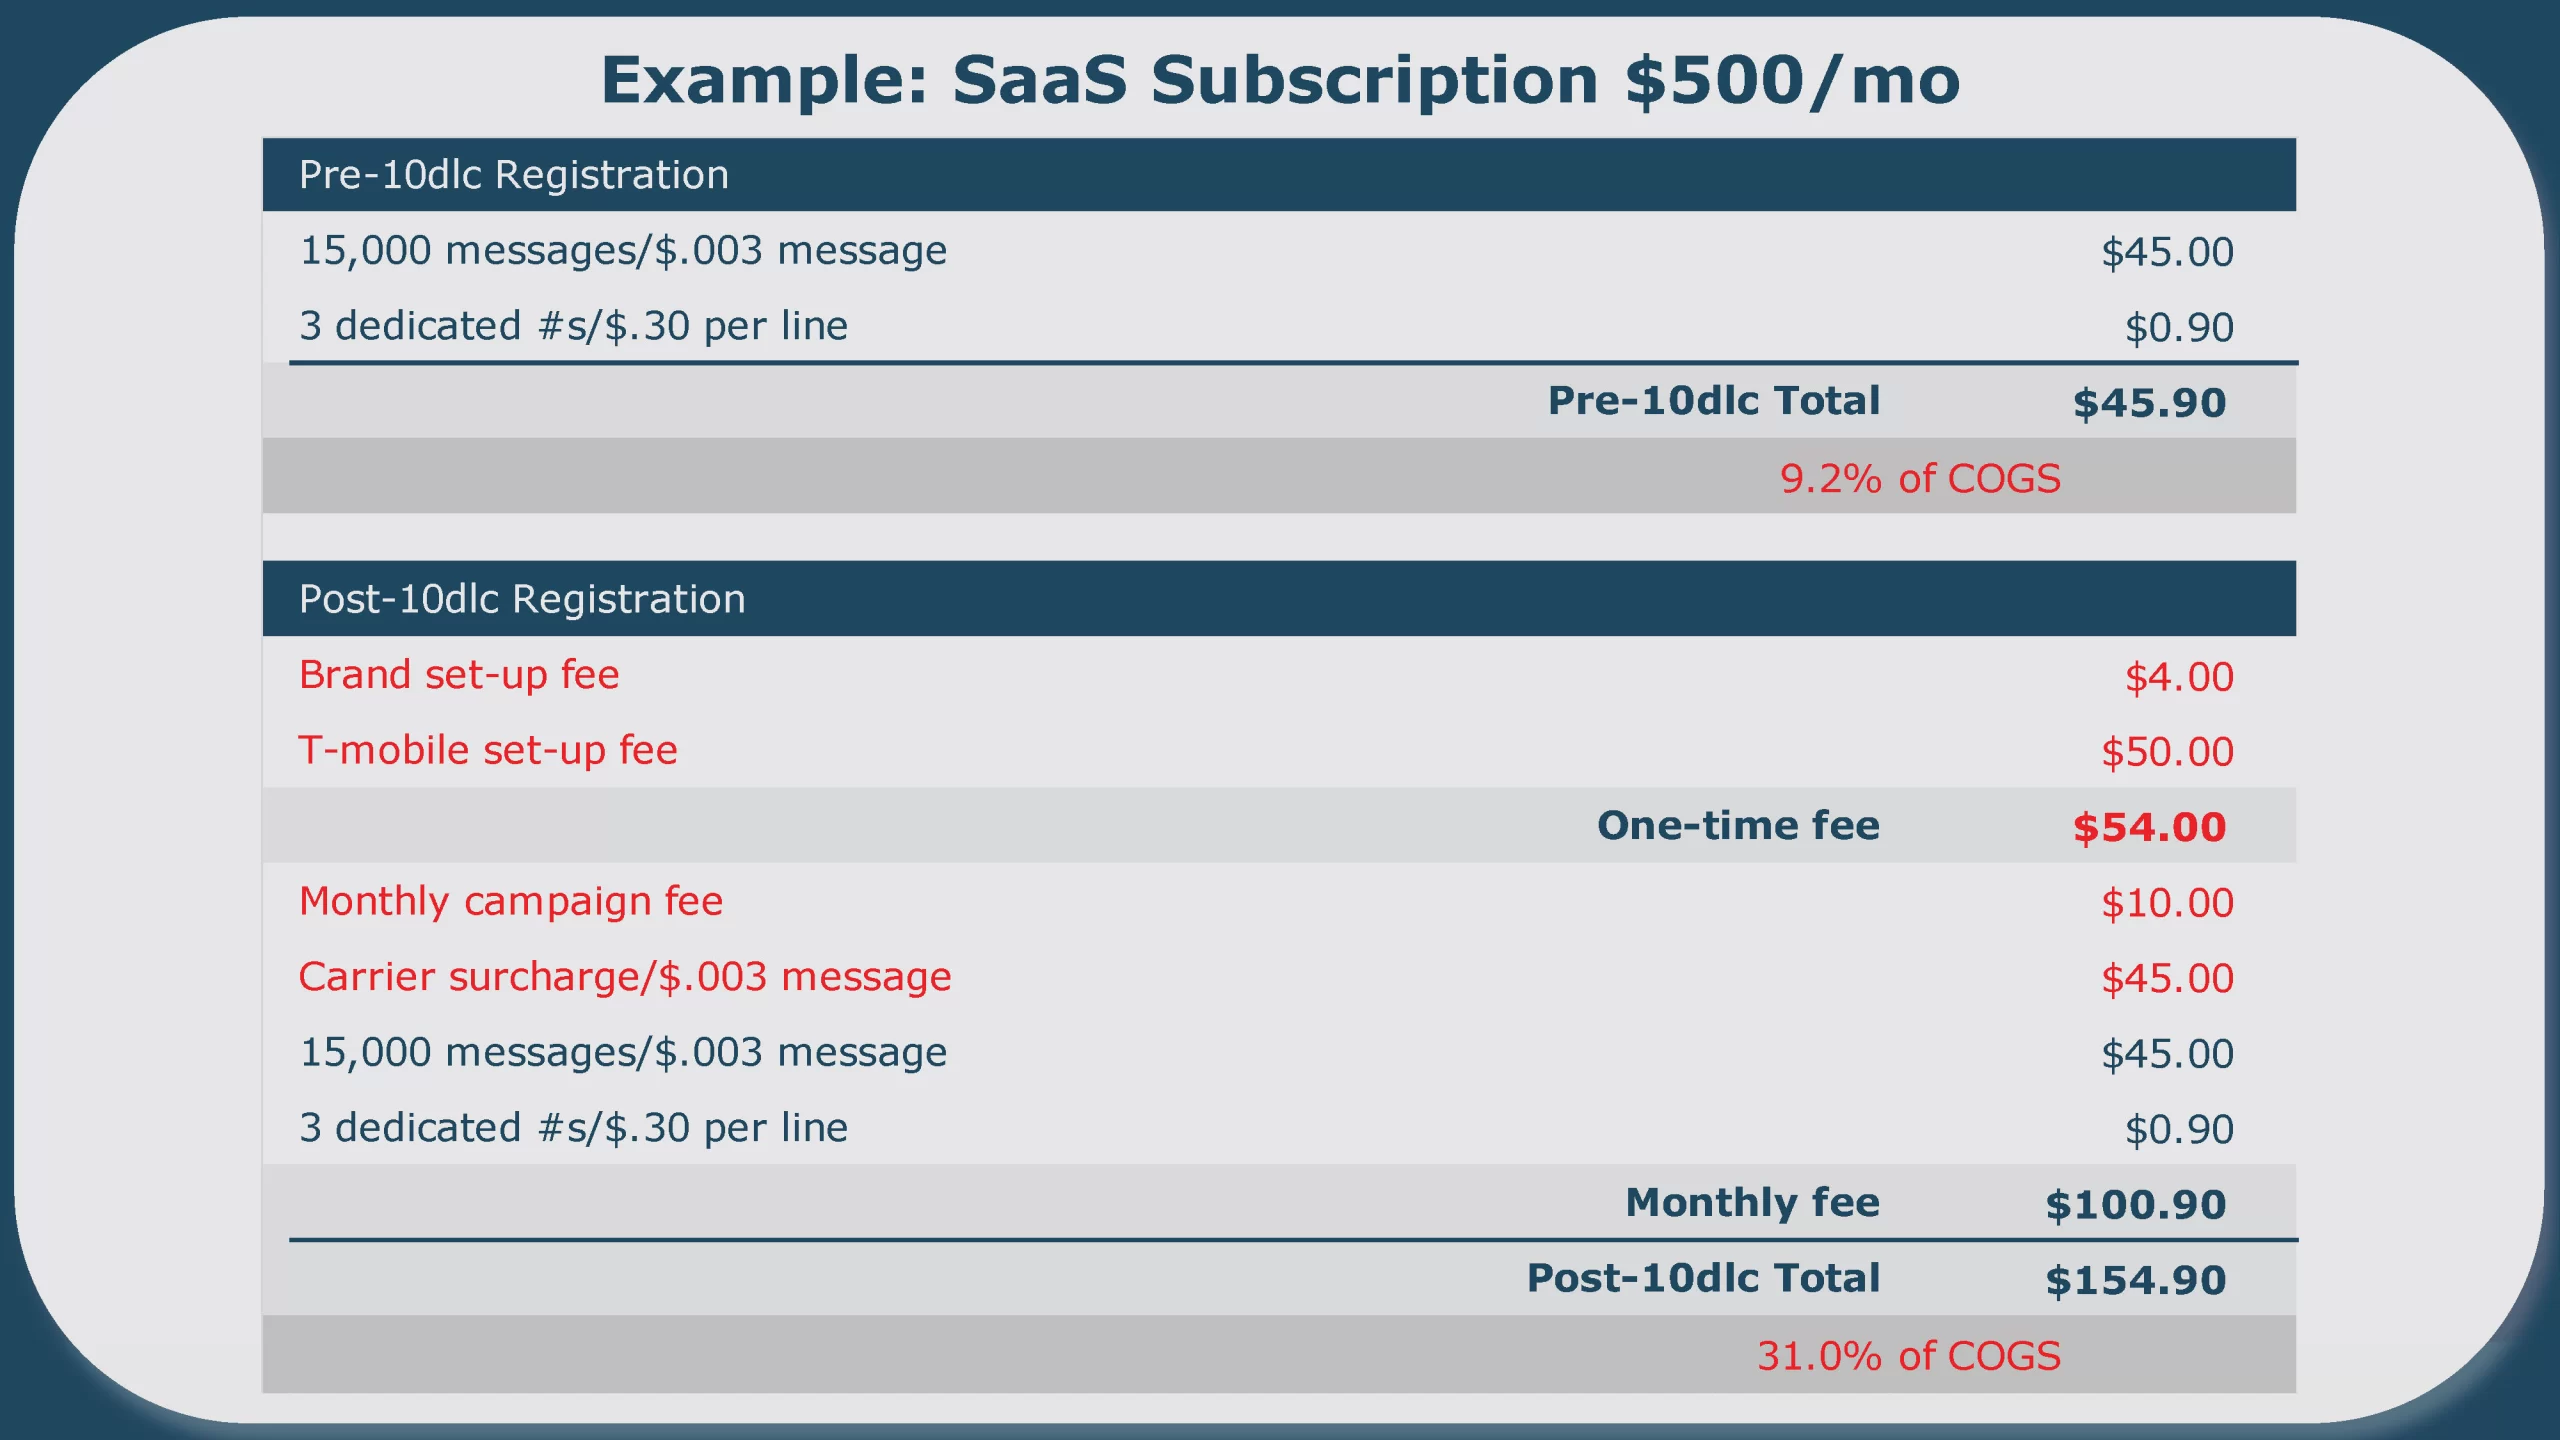 Saas Subscription Prices for SMS